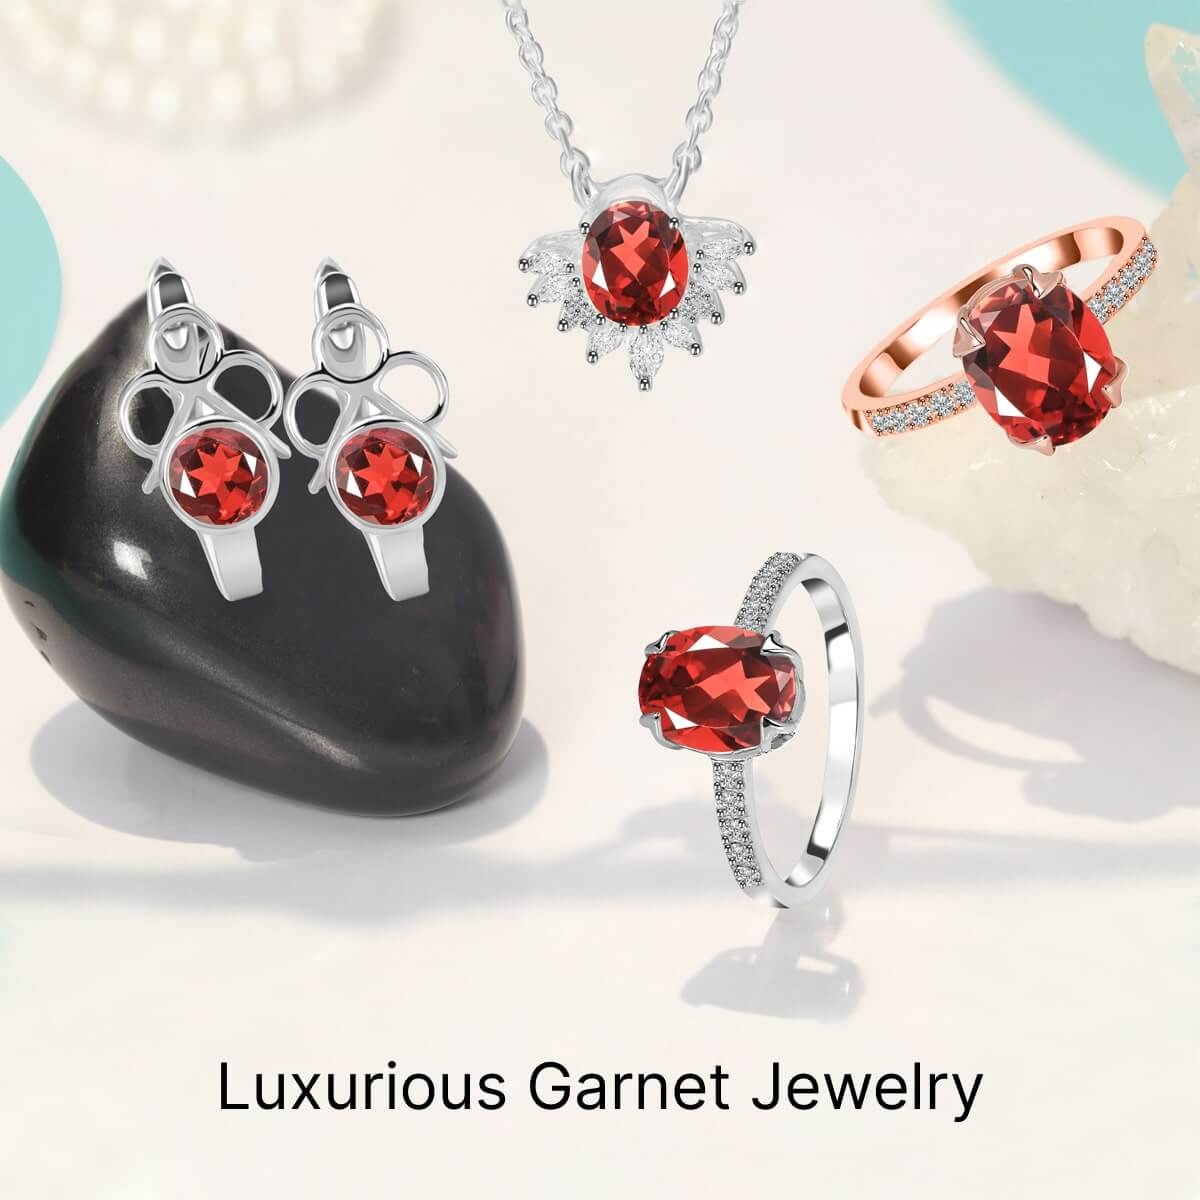 Garnet Jewellery: Timeless Beauty and Significance